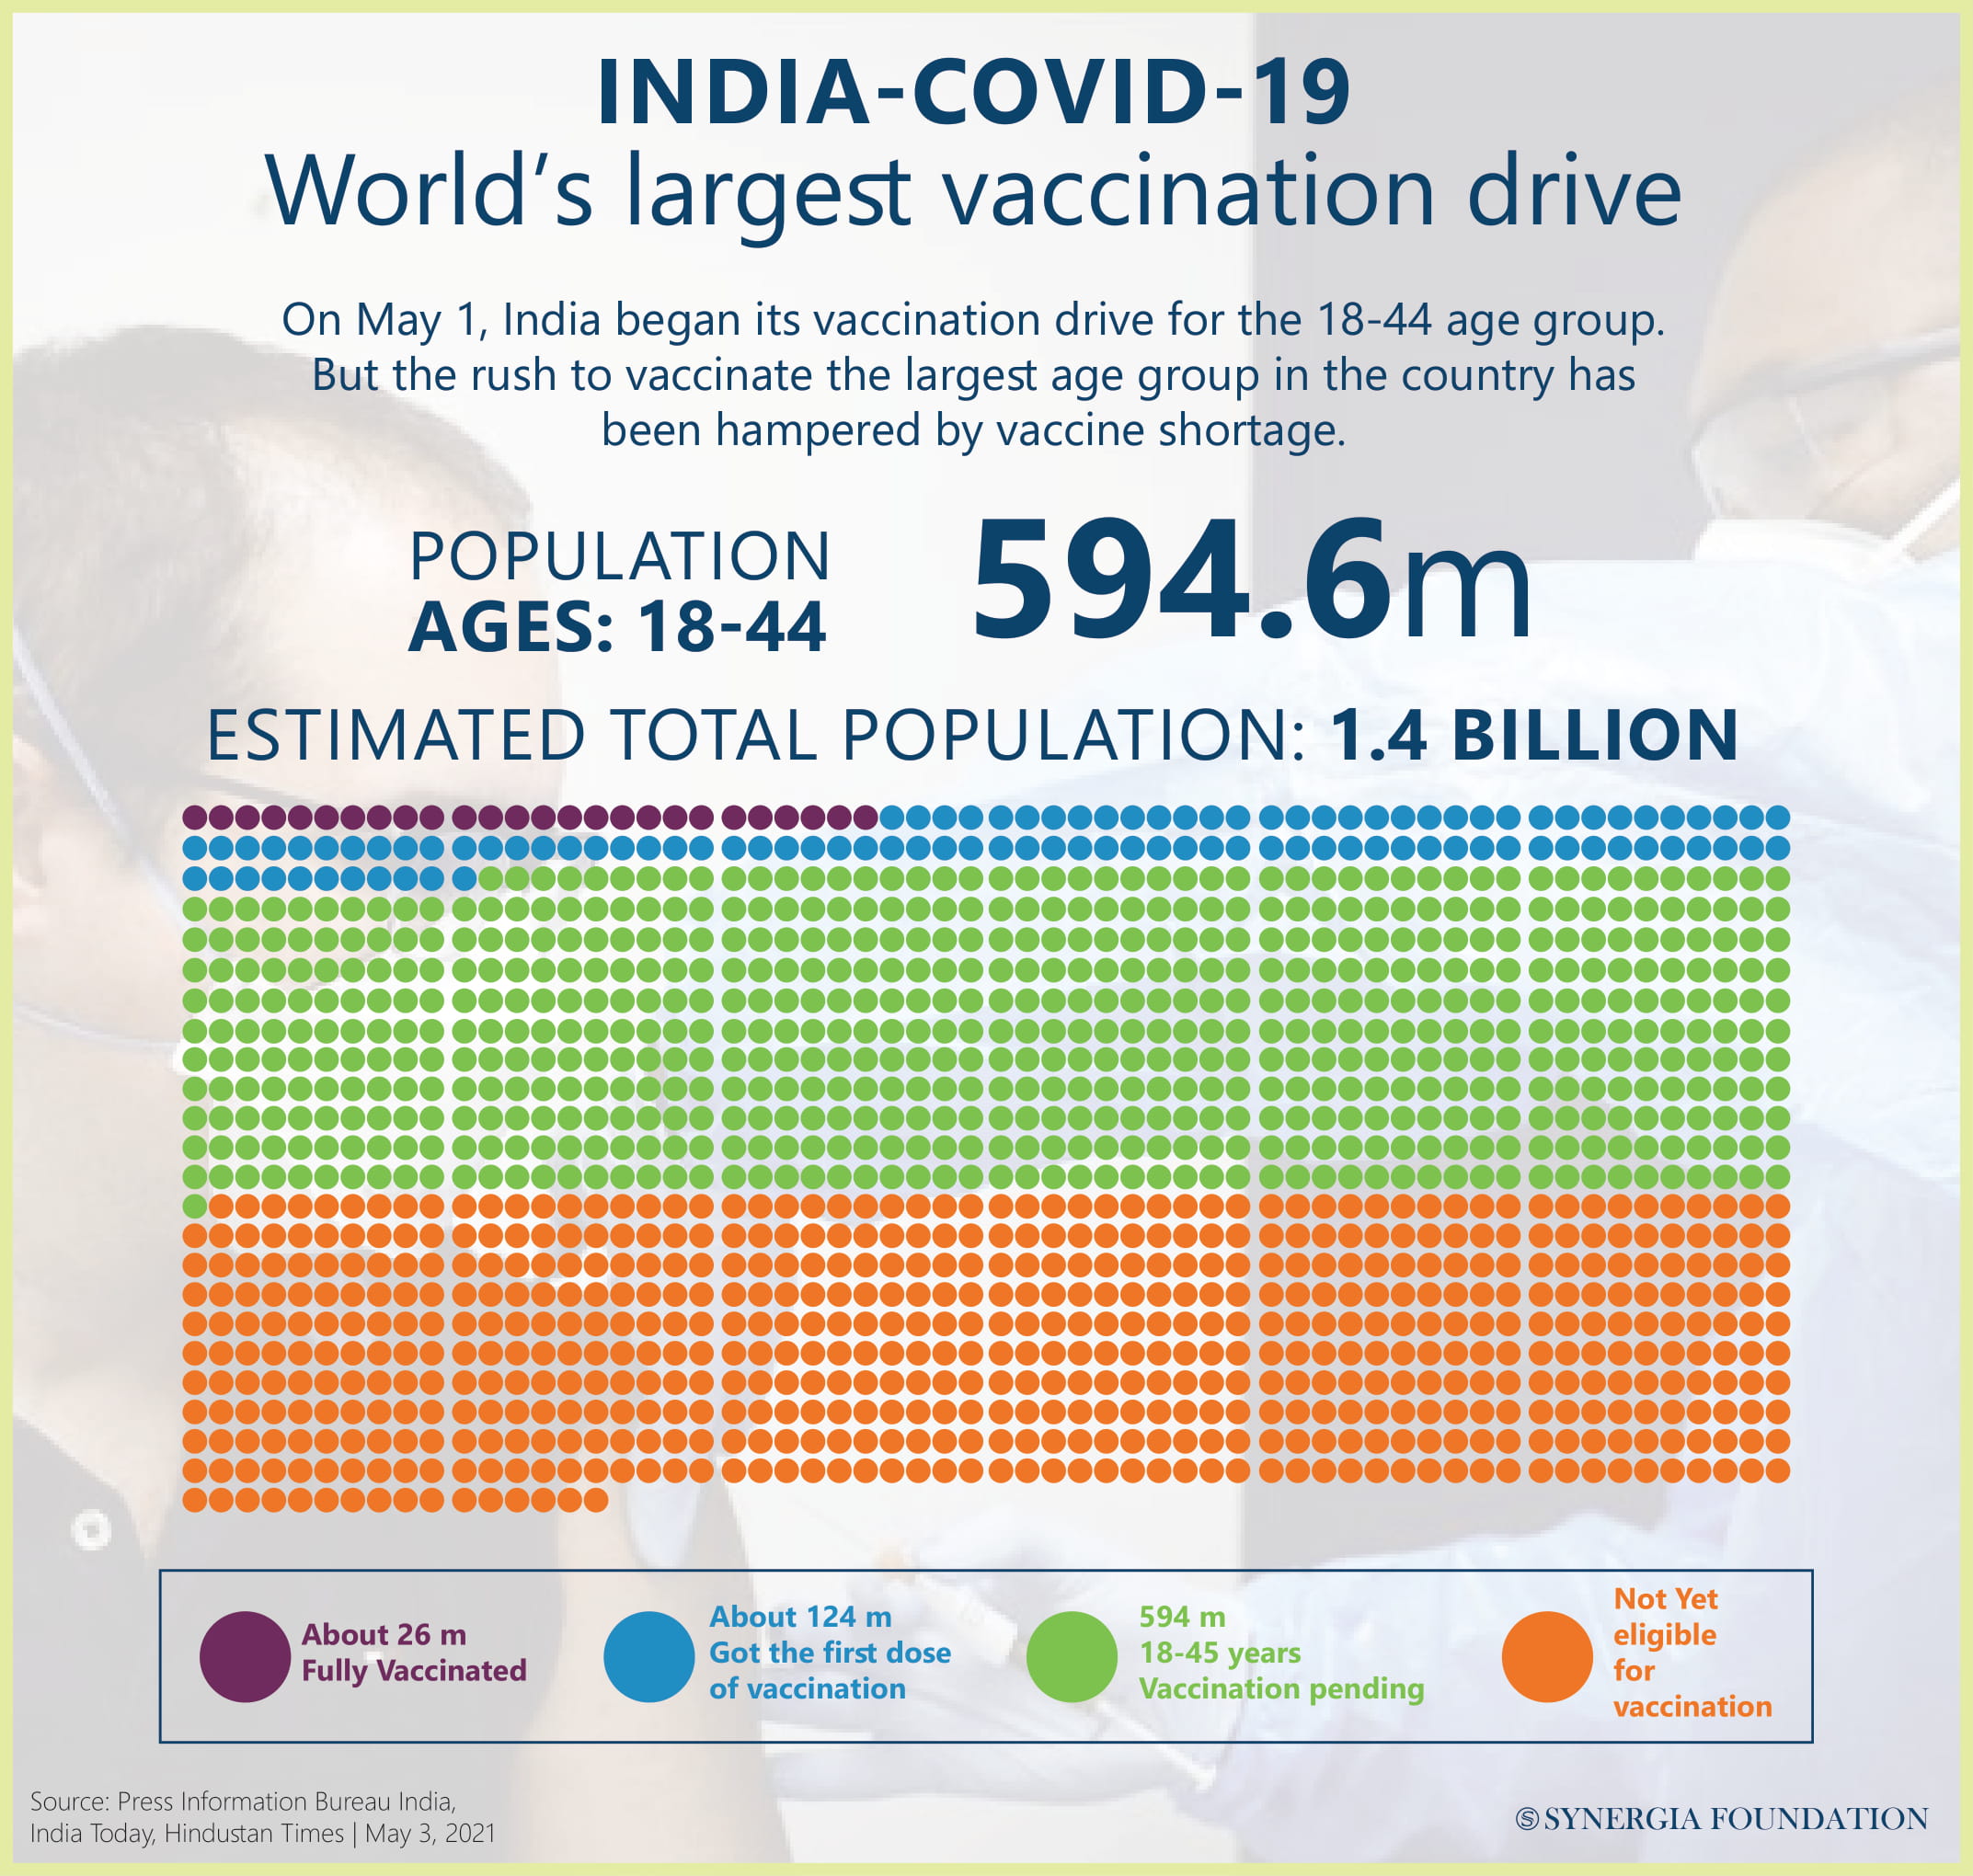 India's vaccination drive